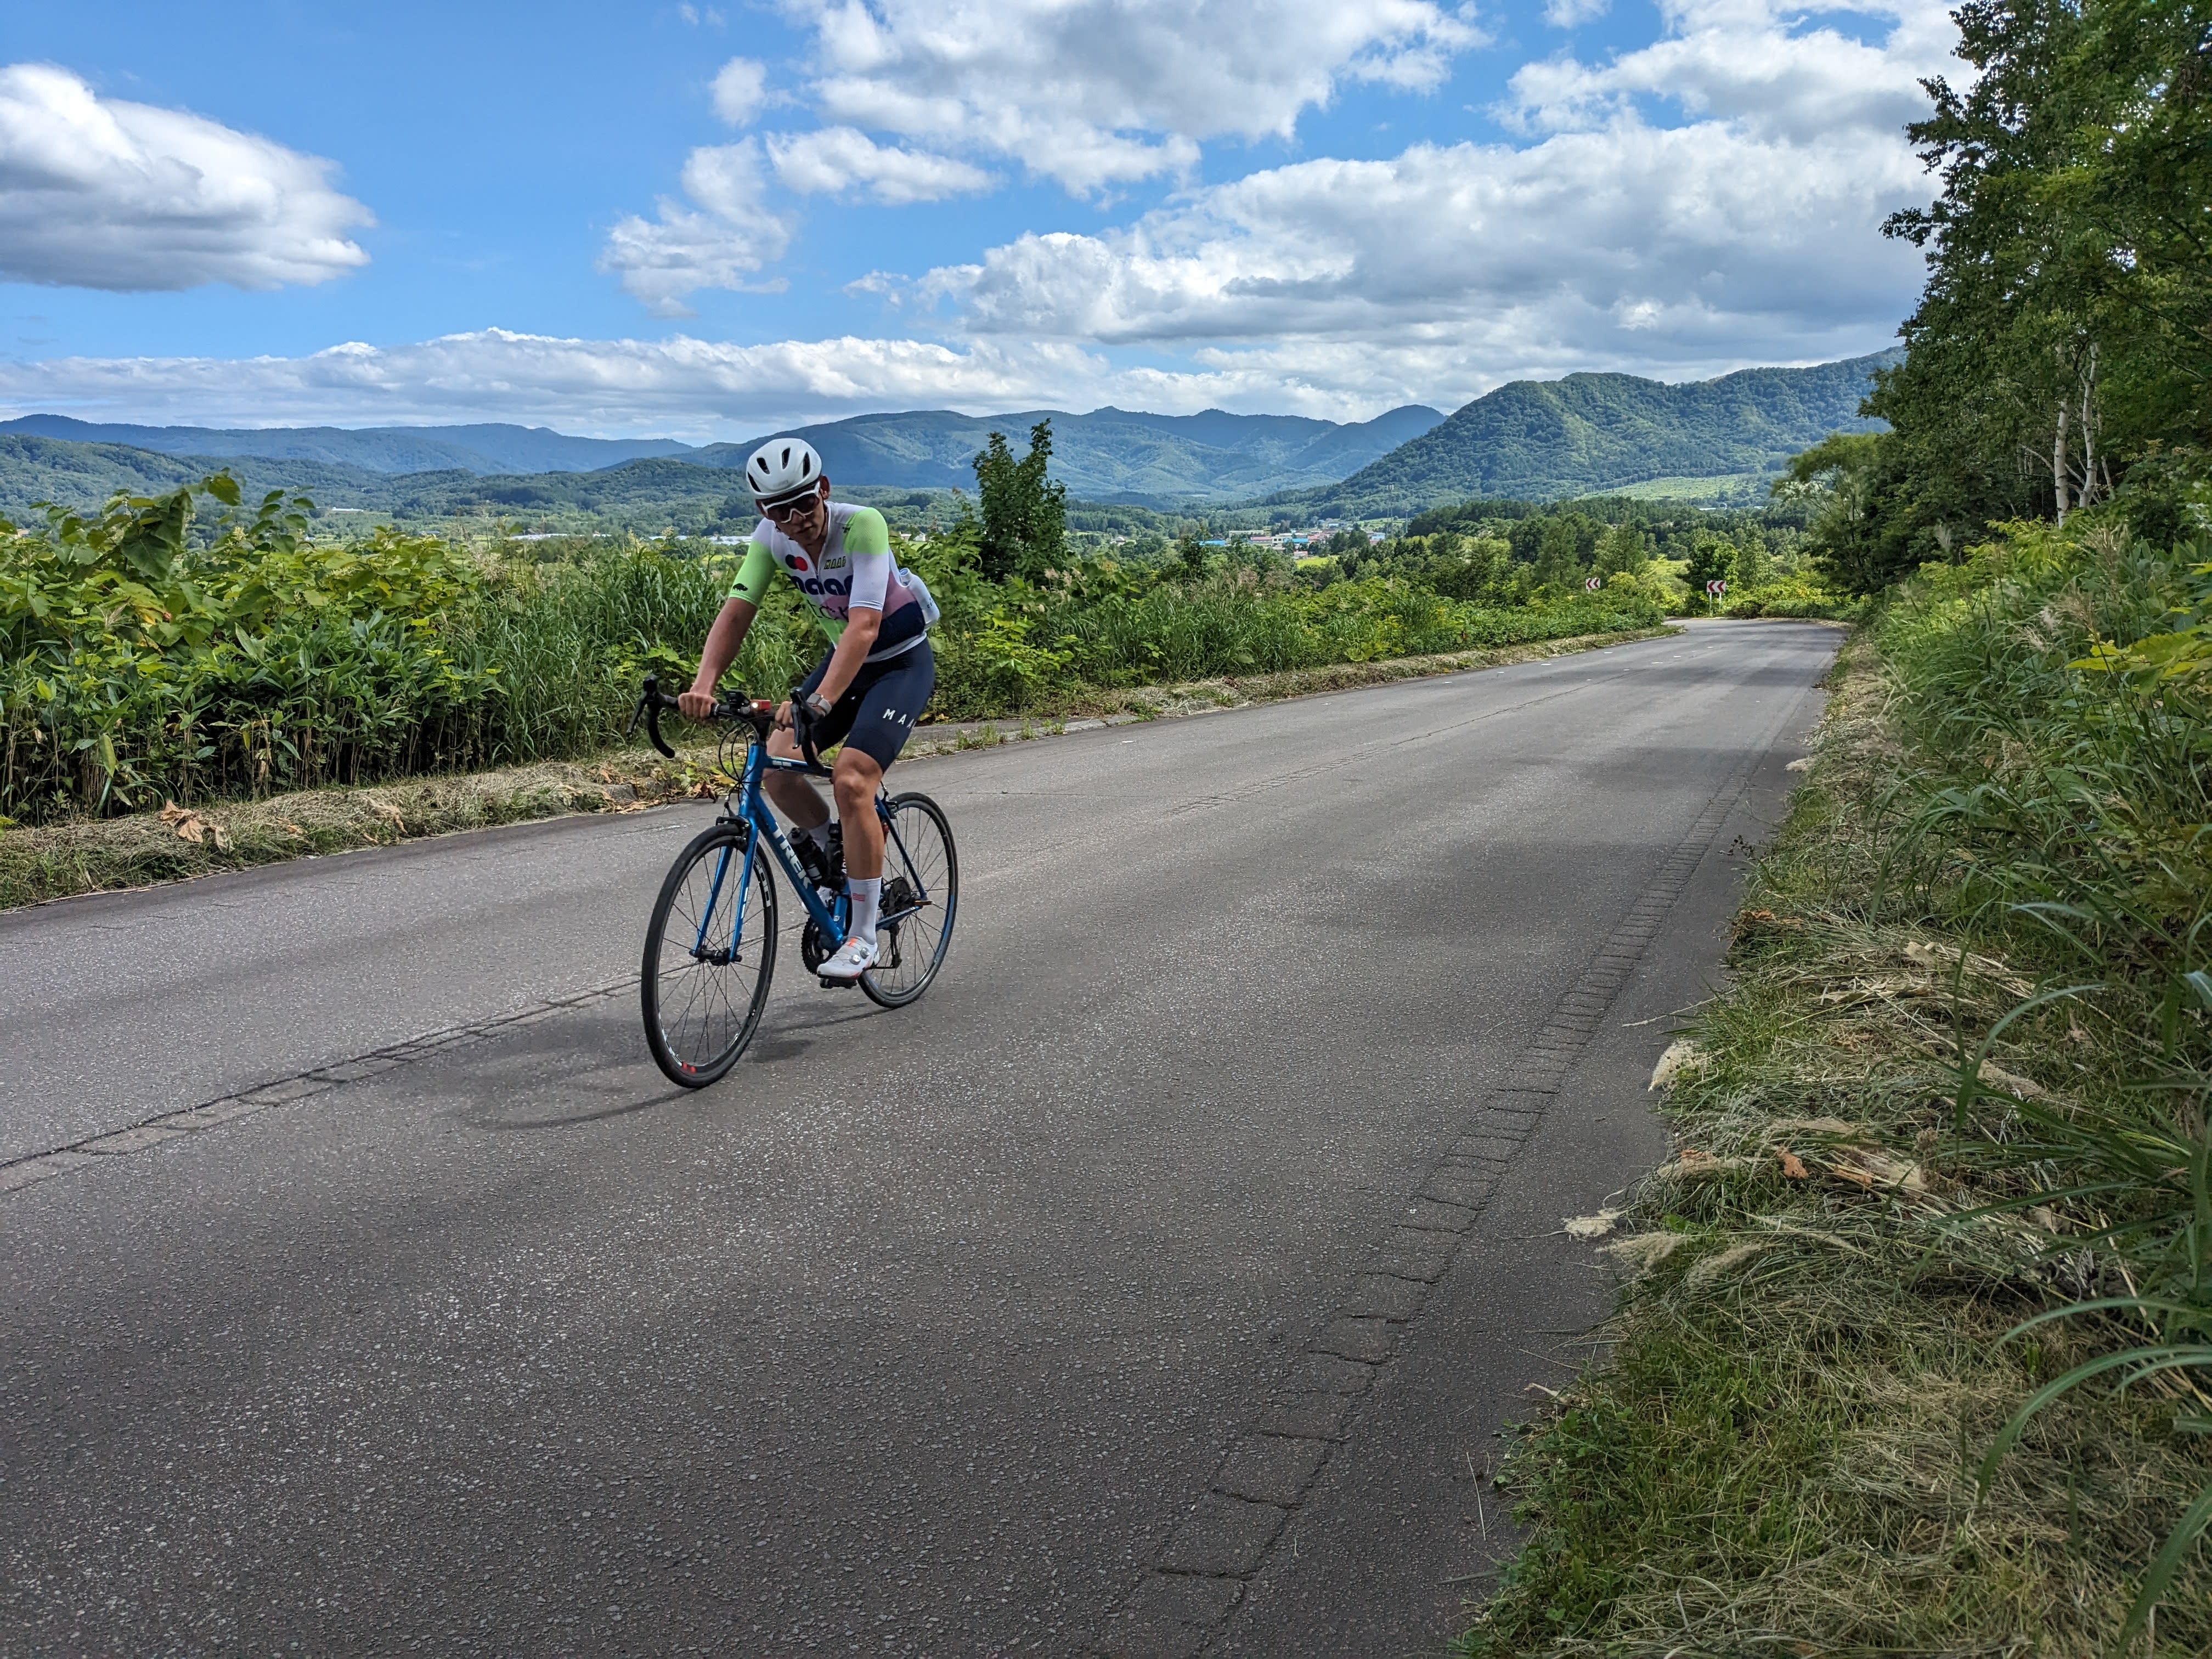 A cyclist in bright cycling gear rides down a country road, with blue skies and white clouds trailing away behind him.